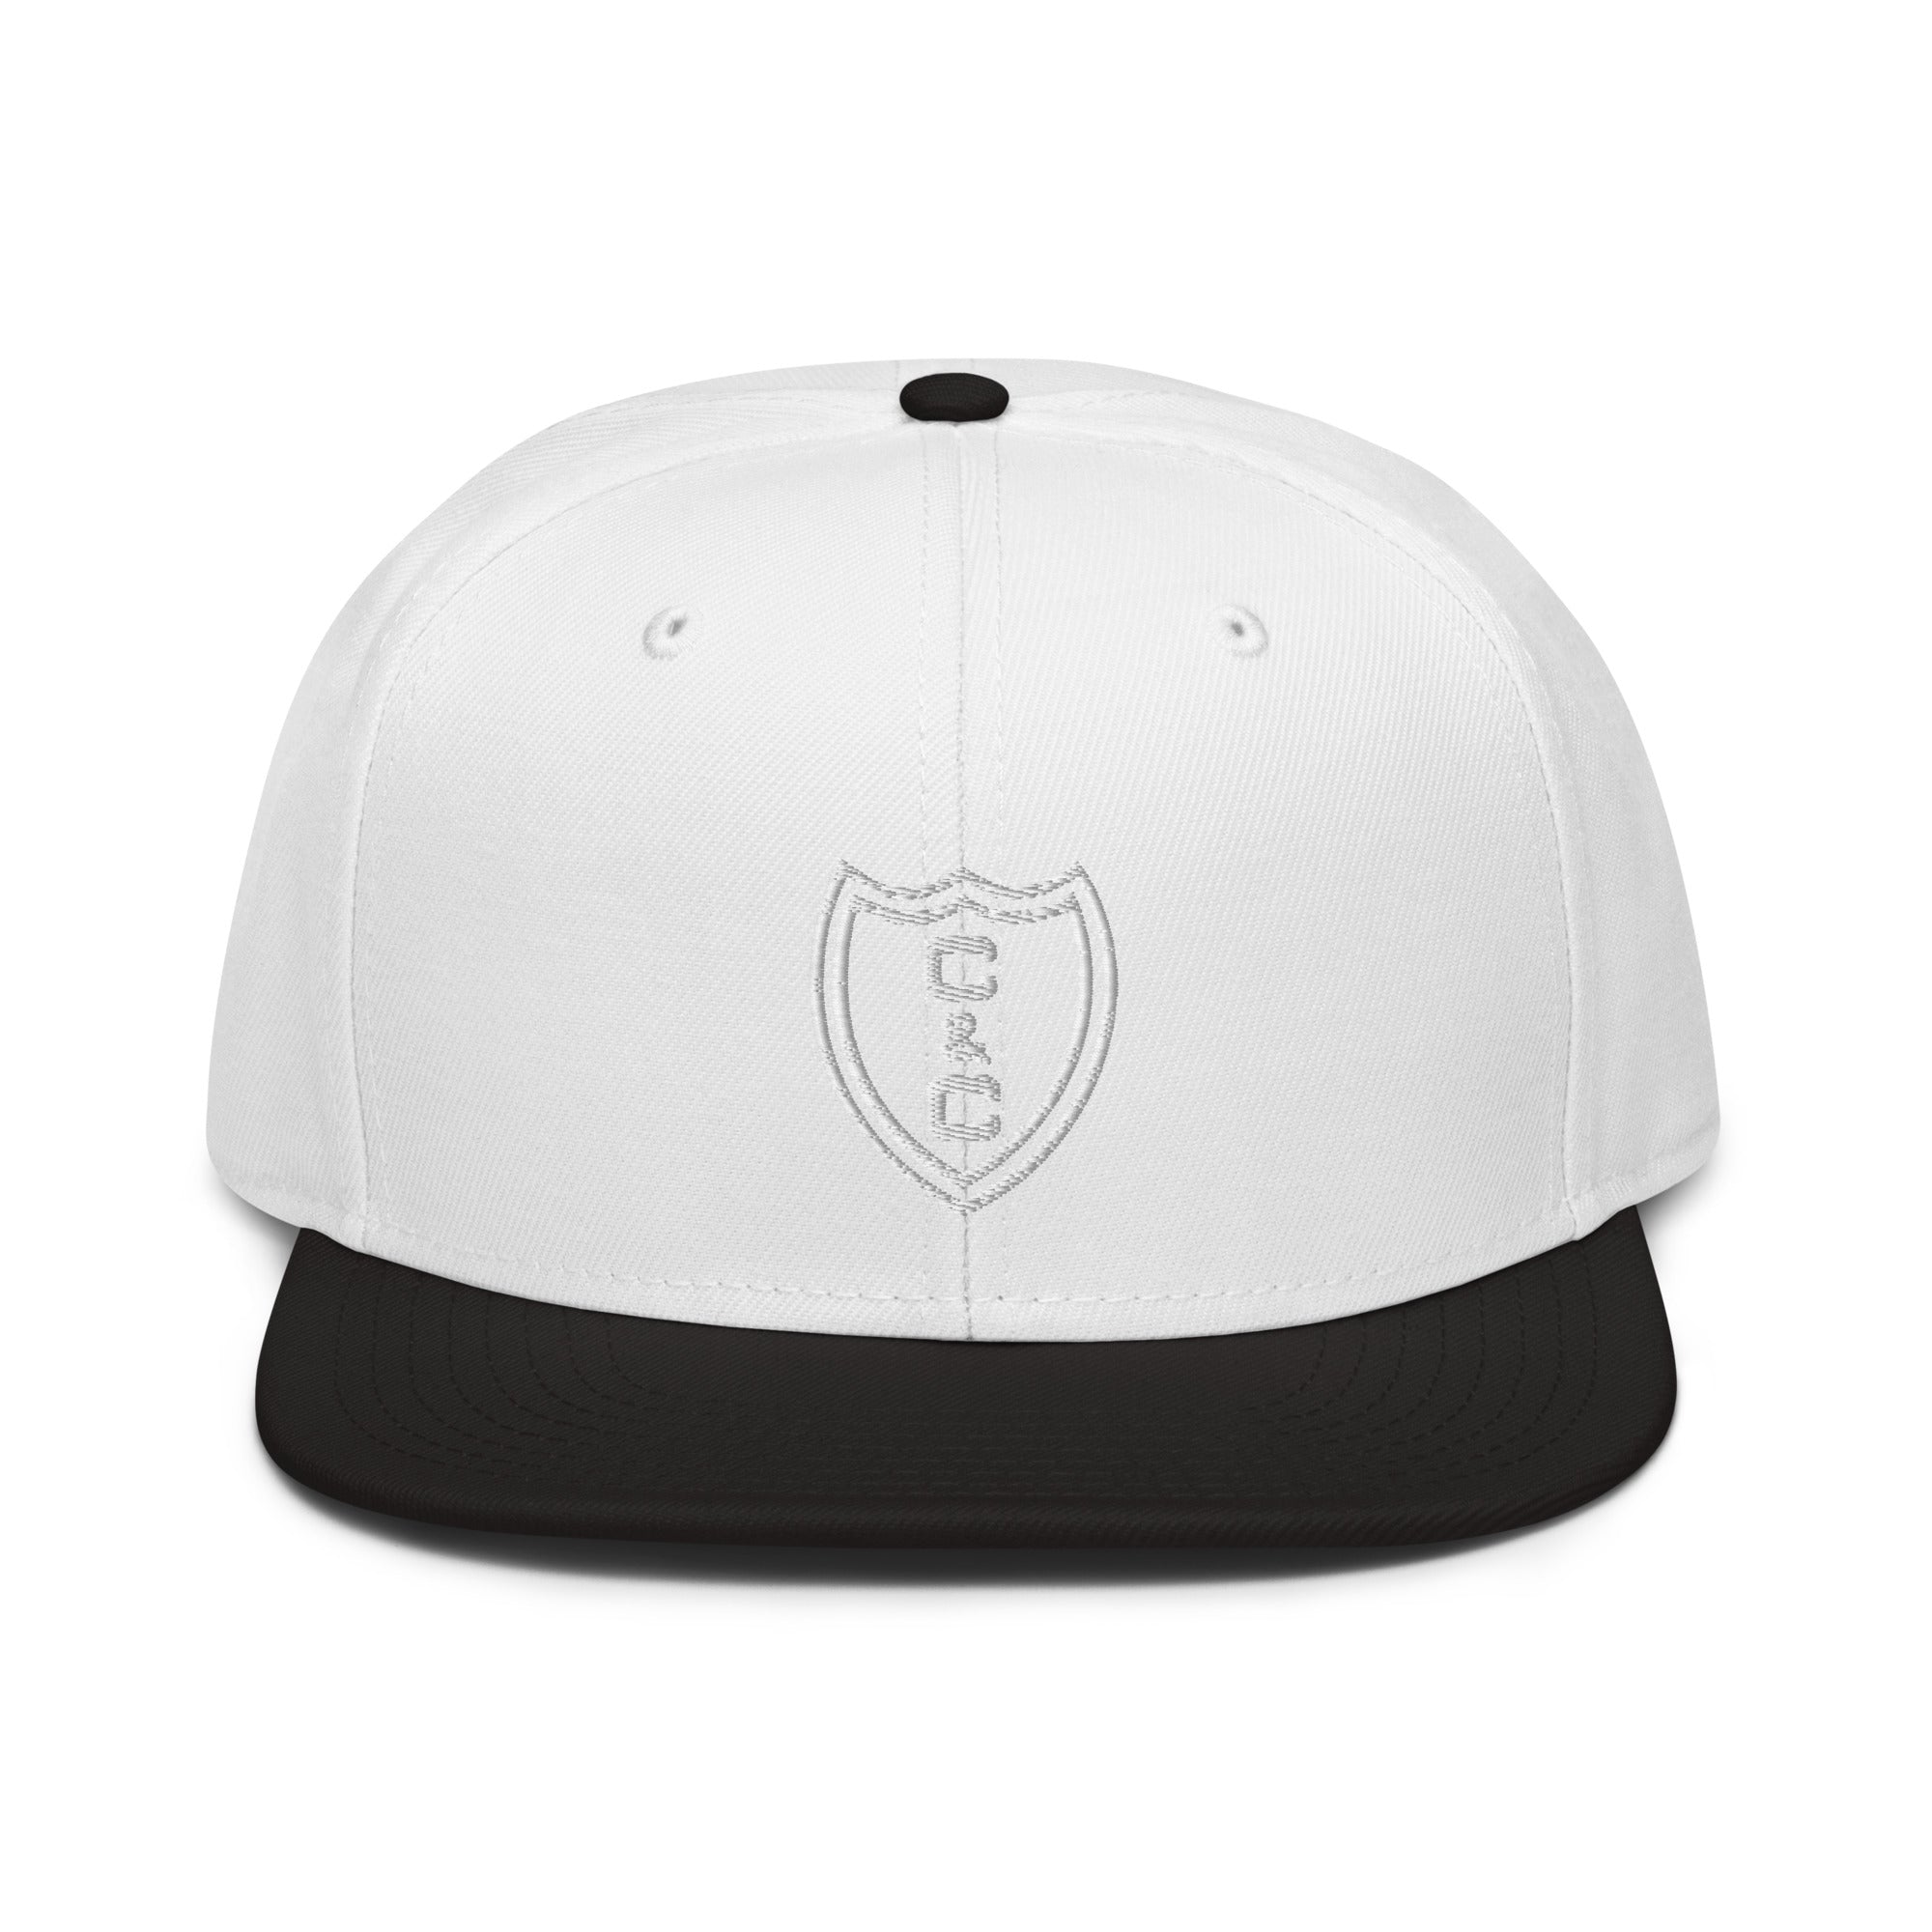 C&C Adult Snapback - White Embroidery (Multiple Color Options)